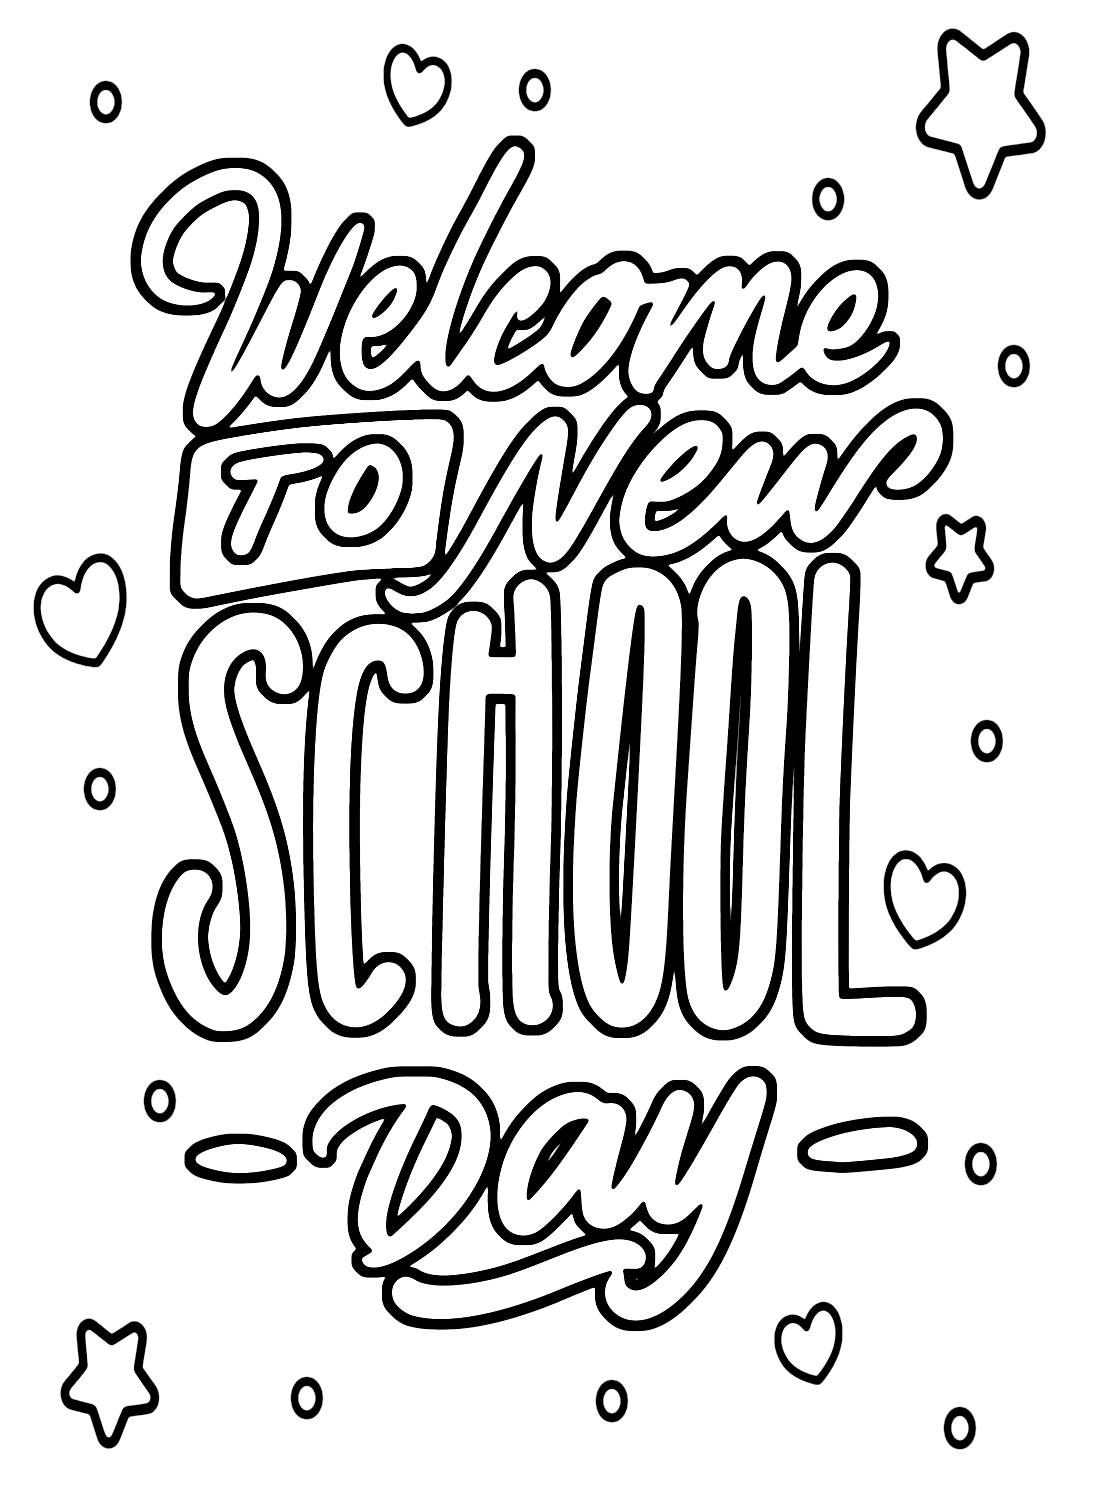 Welcom to New School Day Coloring from Back to School